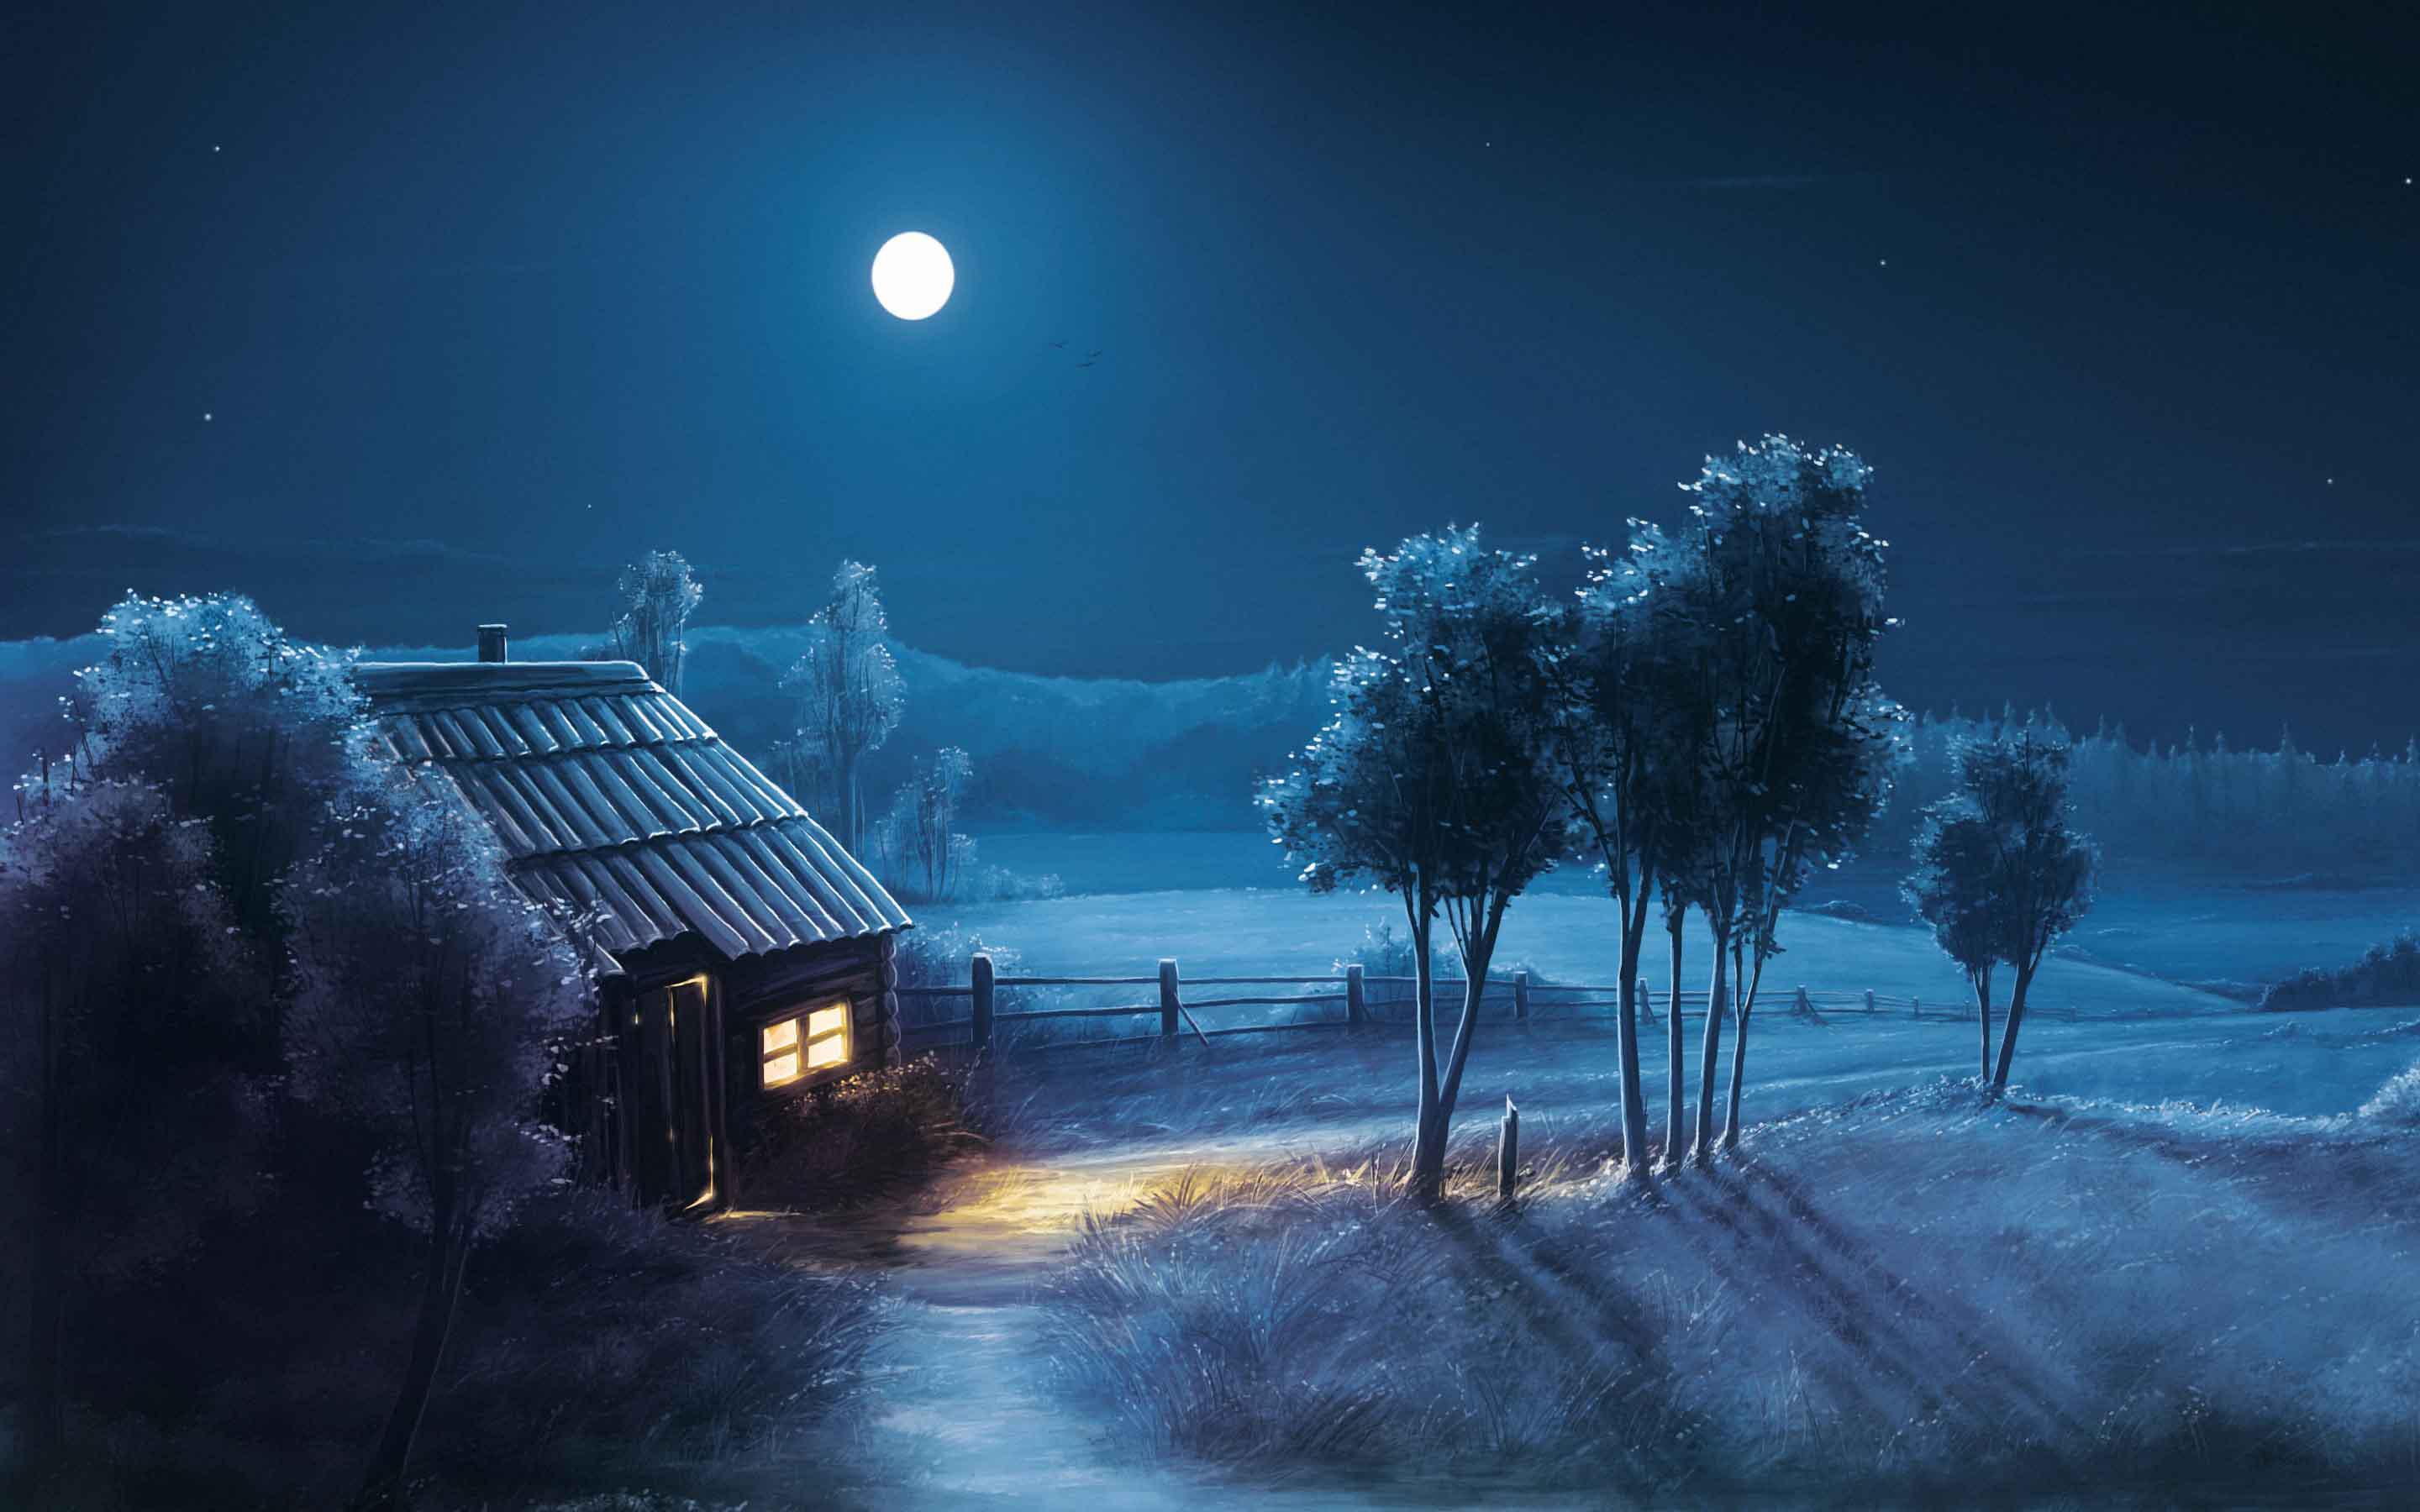 Blue Night Full Moon Scenery wallpaper. nature and landscape